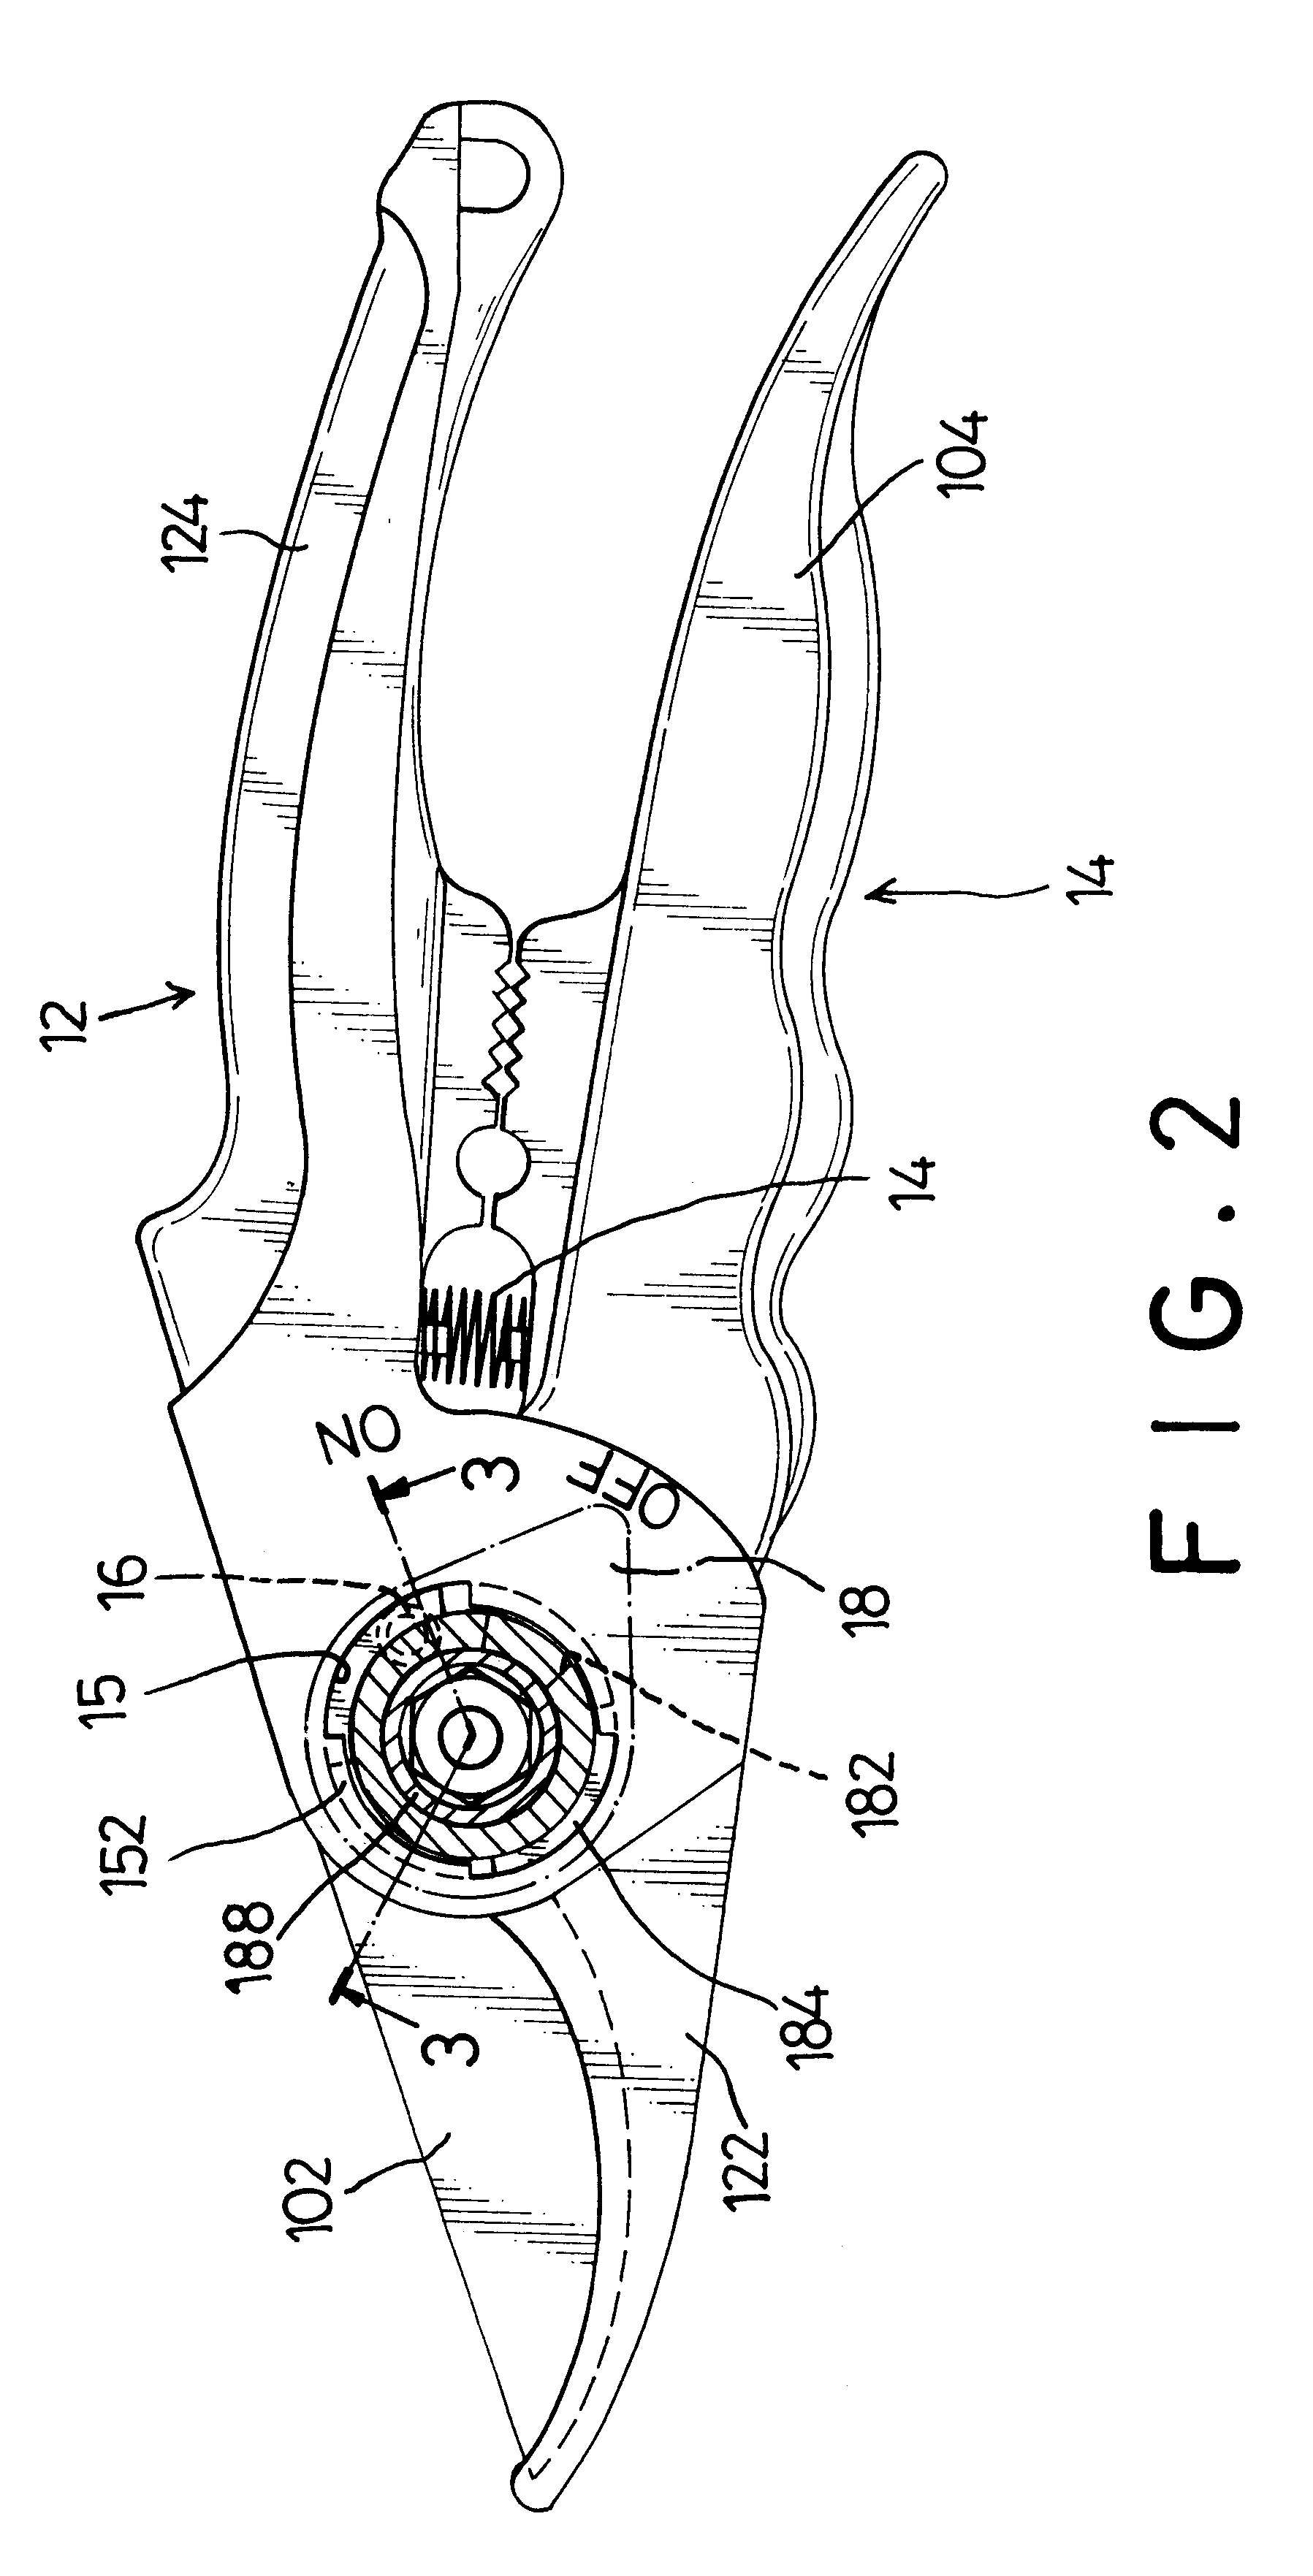 Pruning shears with a lock device